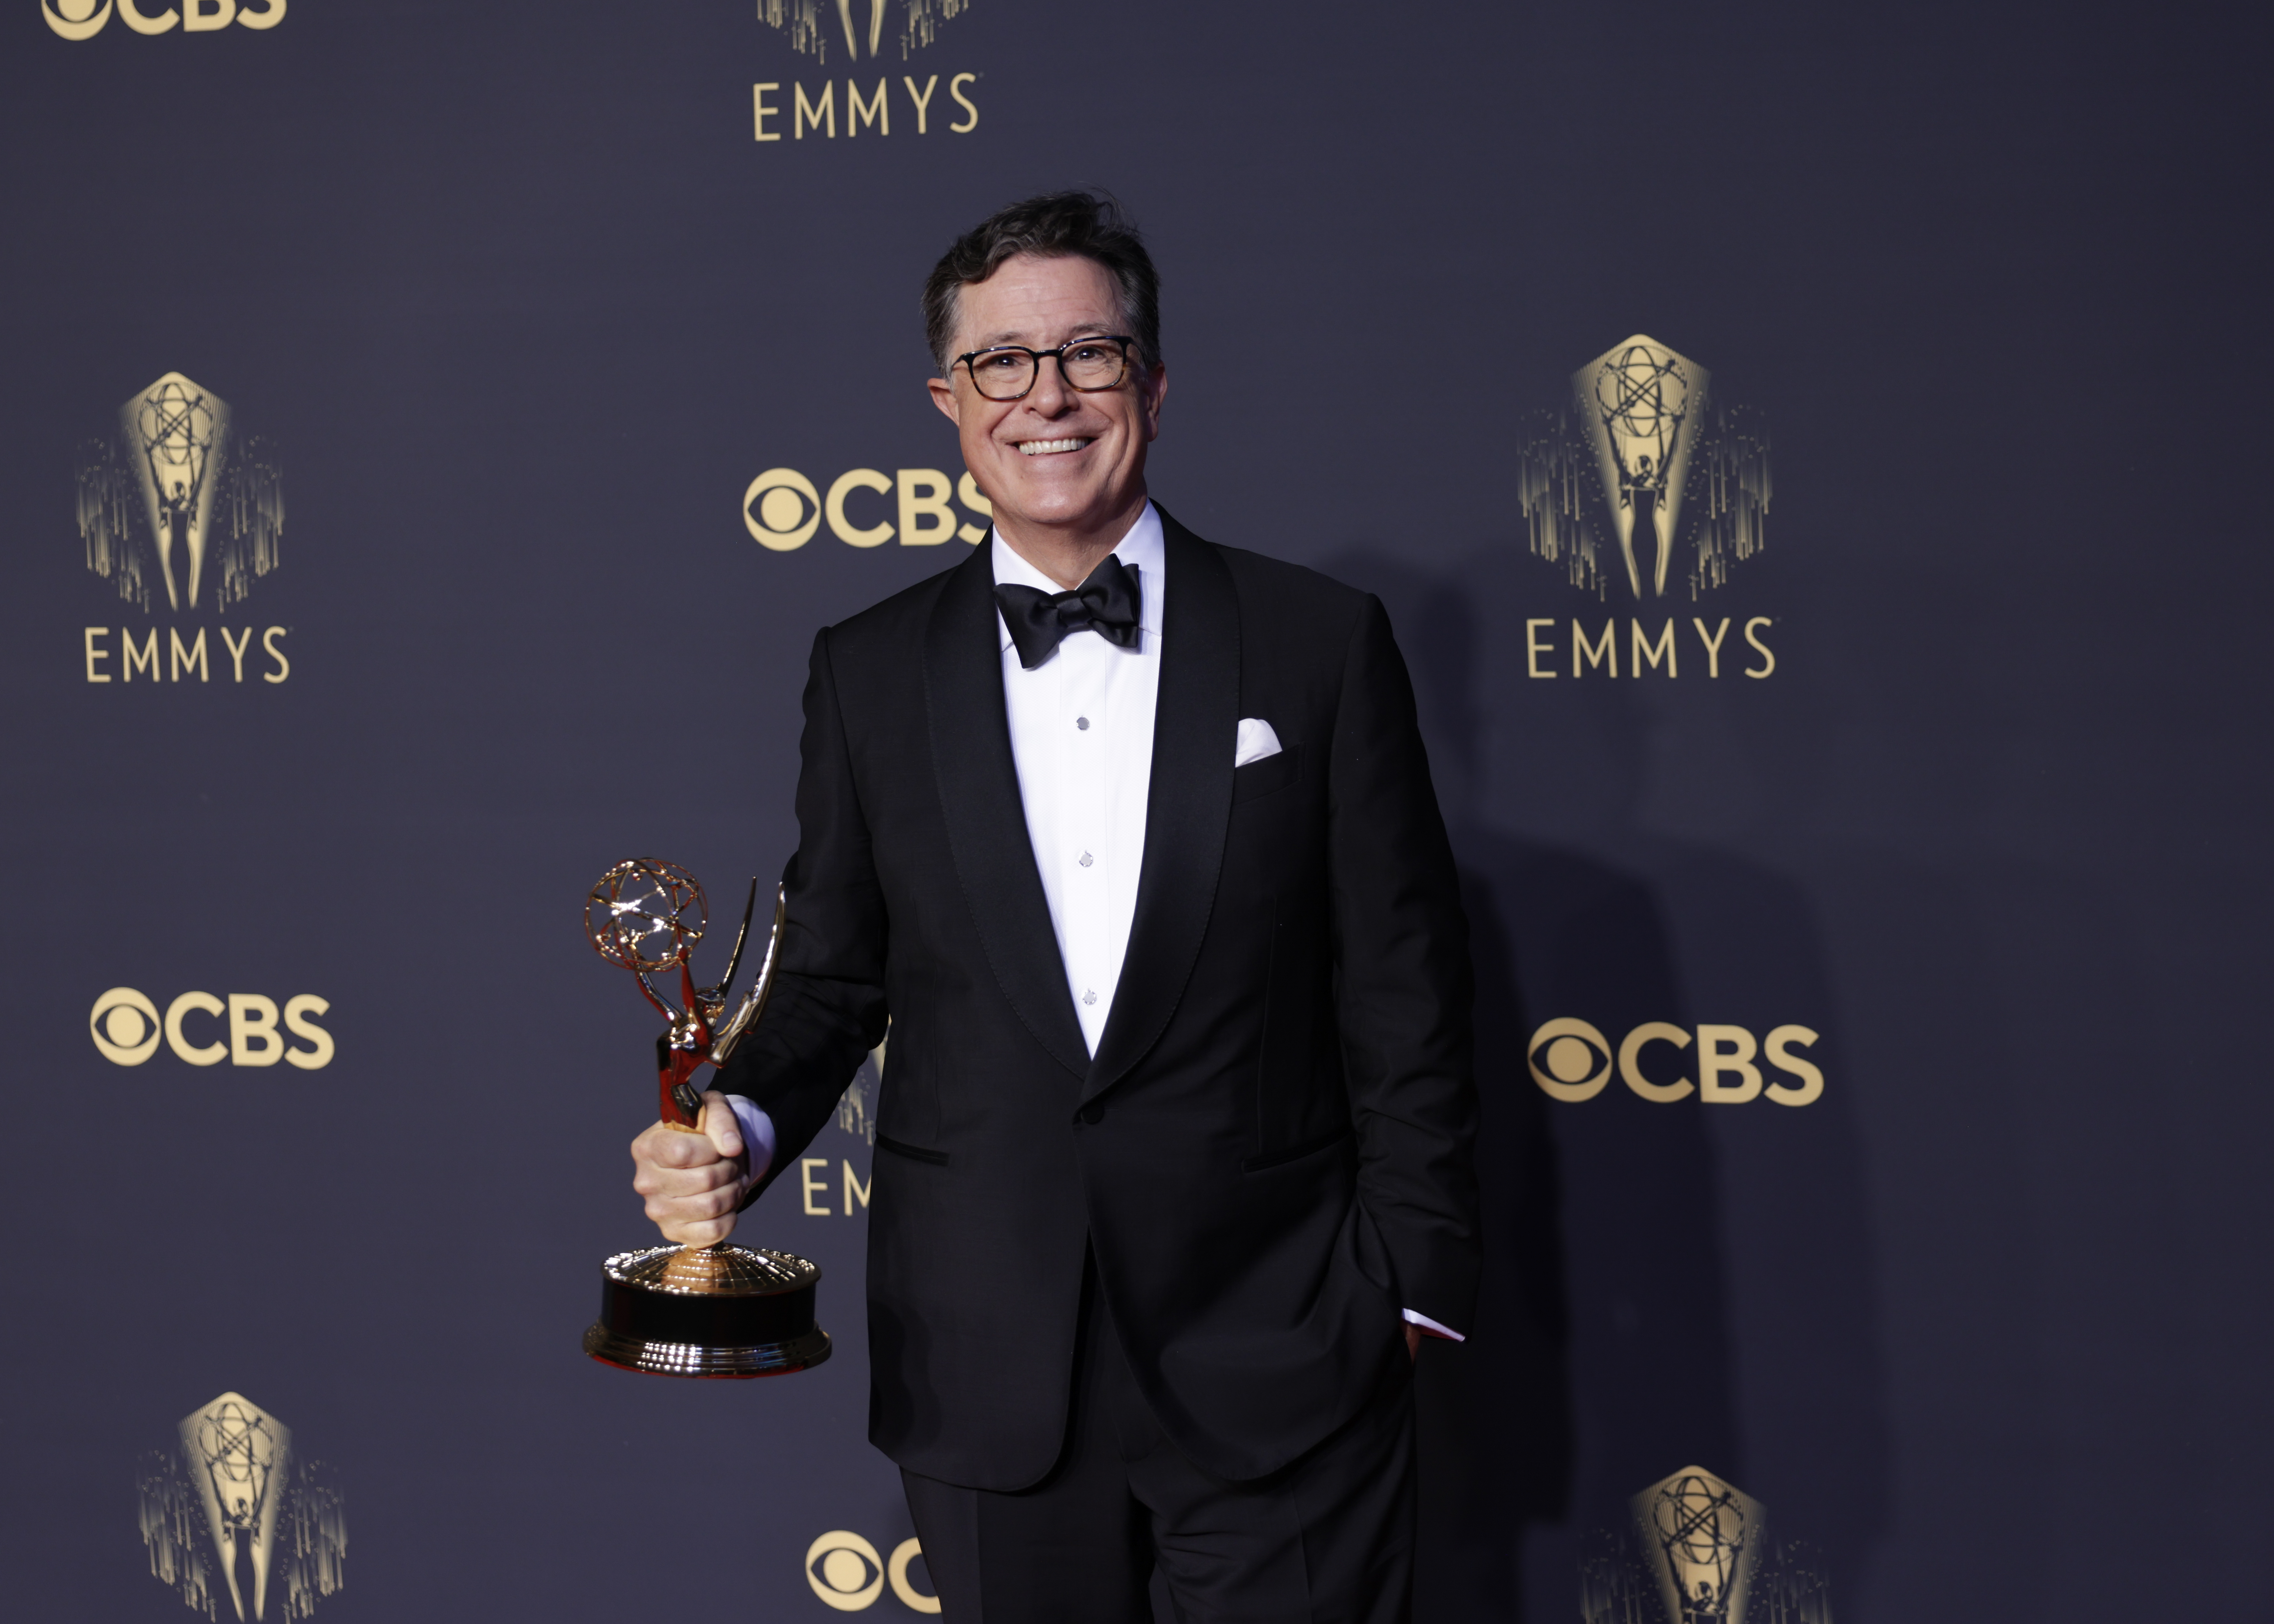 Stephen Colbert at the 73rd Emmy Awards on September 19, 2021, in Los Angeles | Source: Getty Images